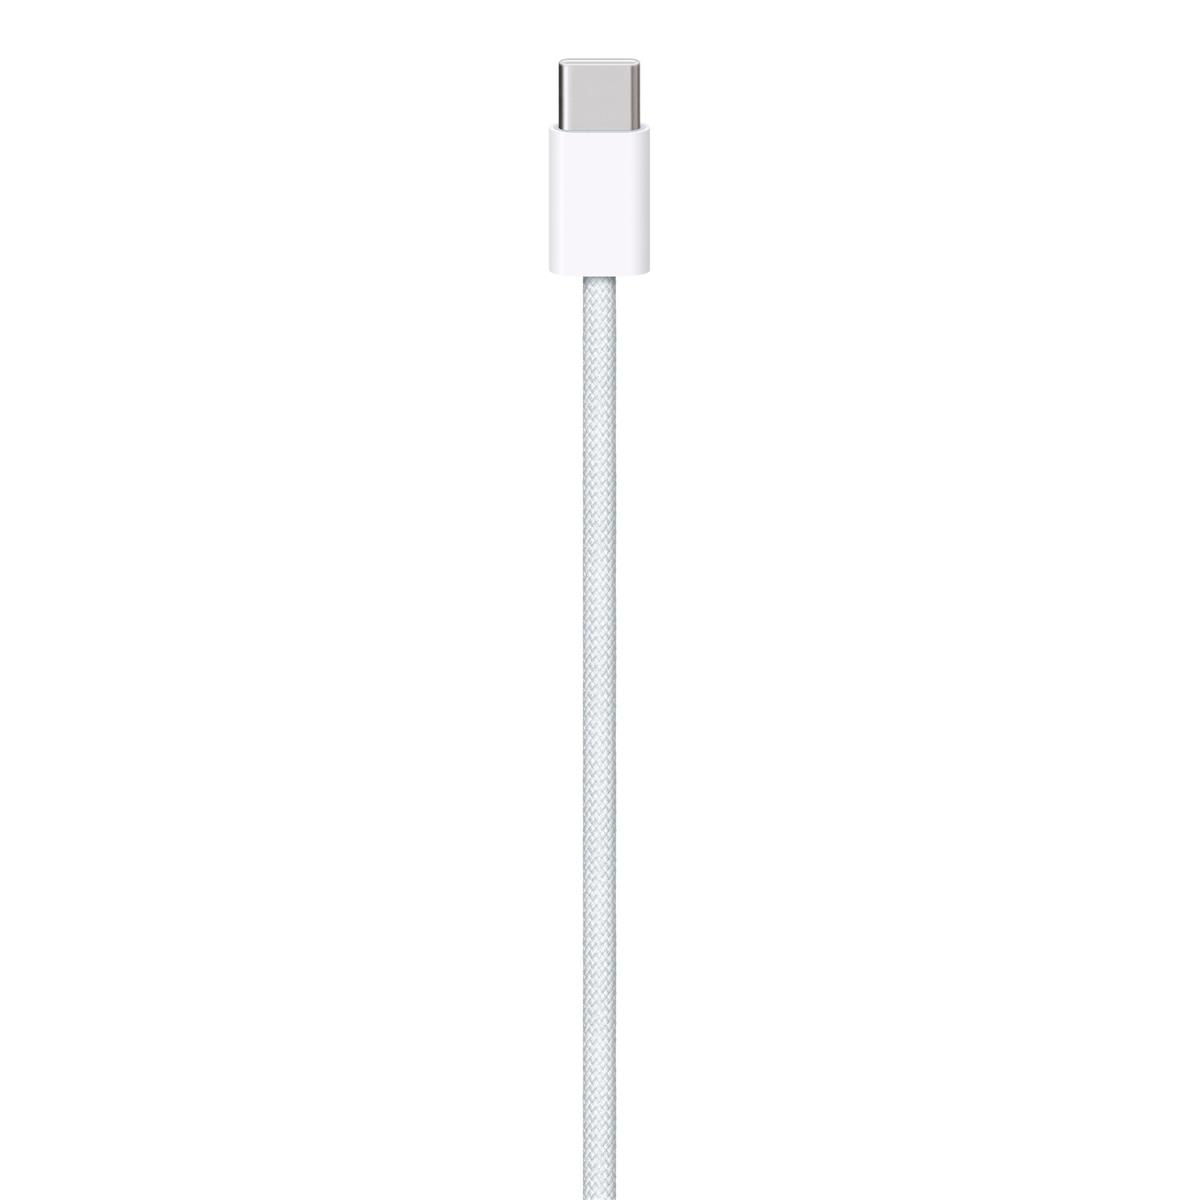 Image of Apple USB-C Woven Charge Cable